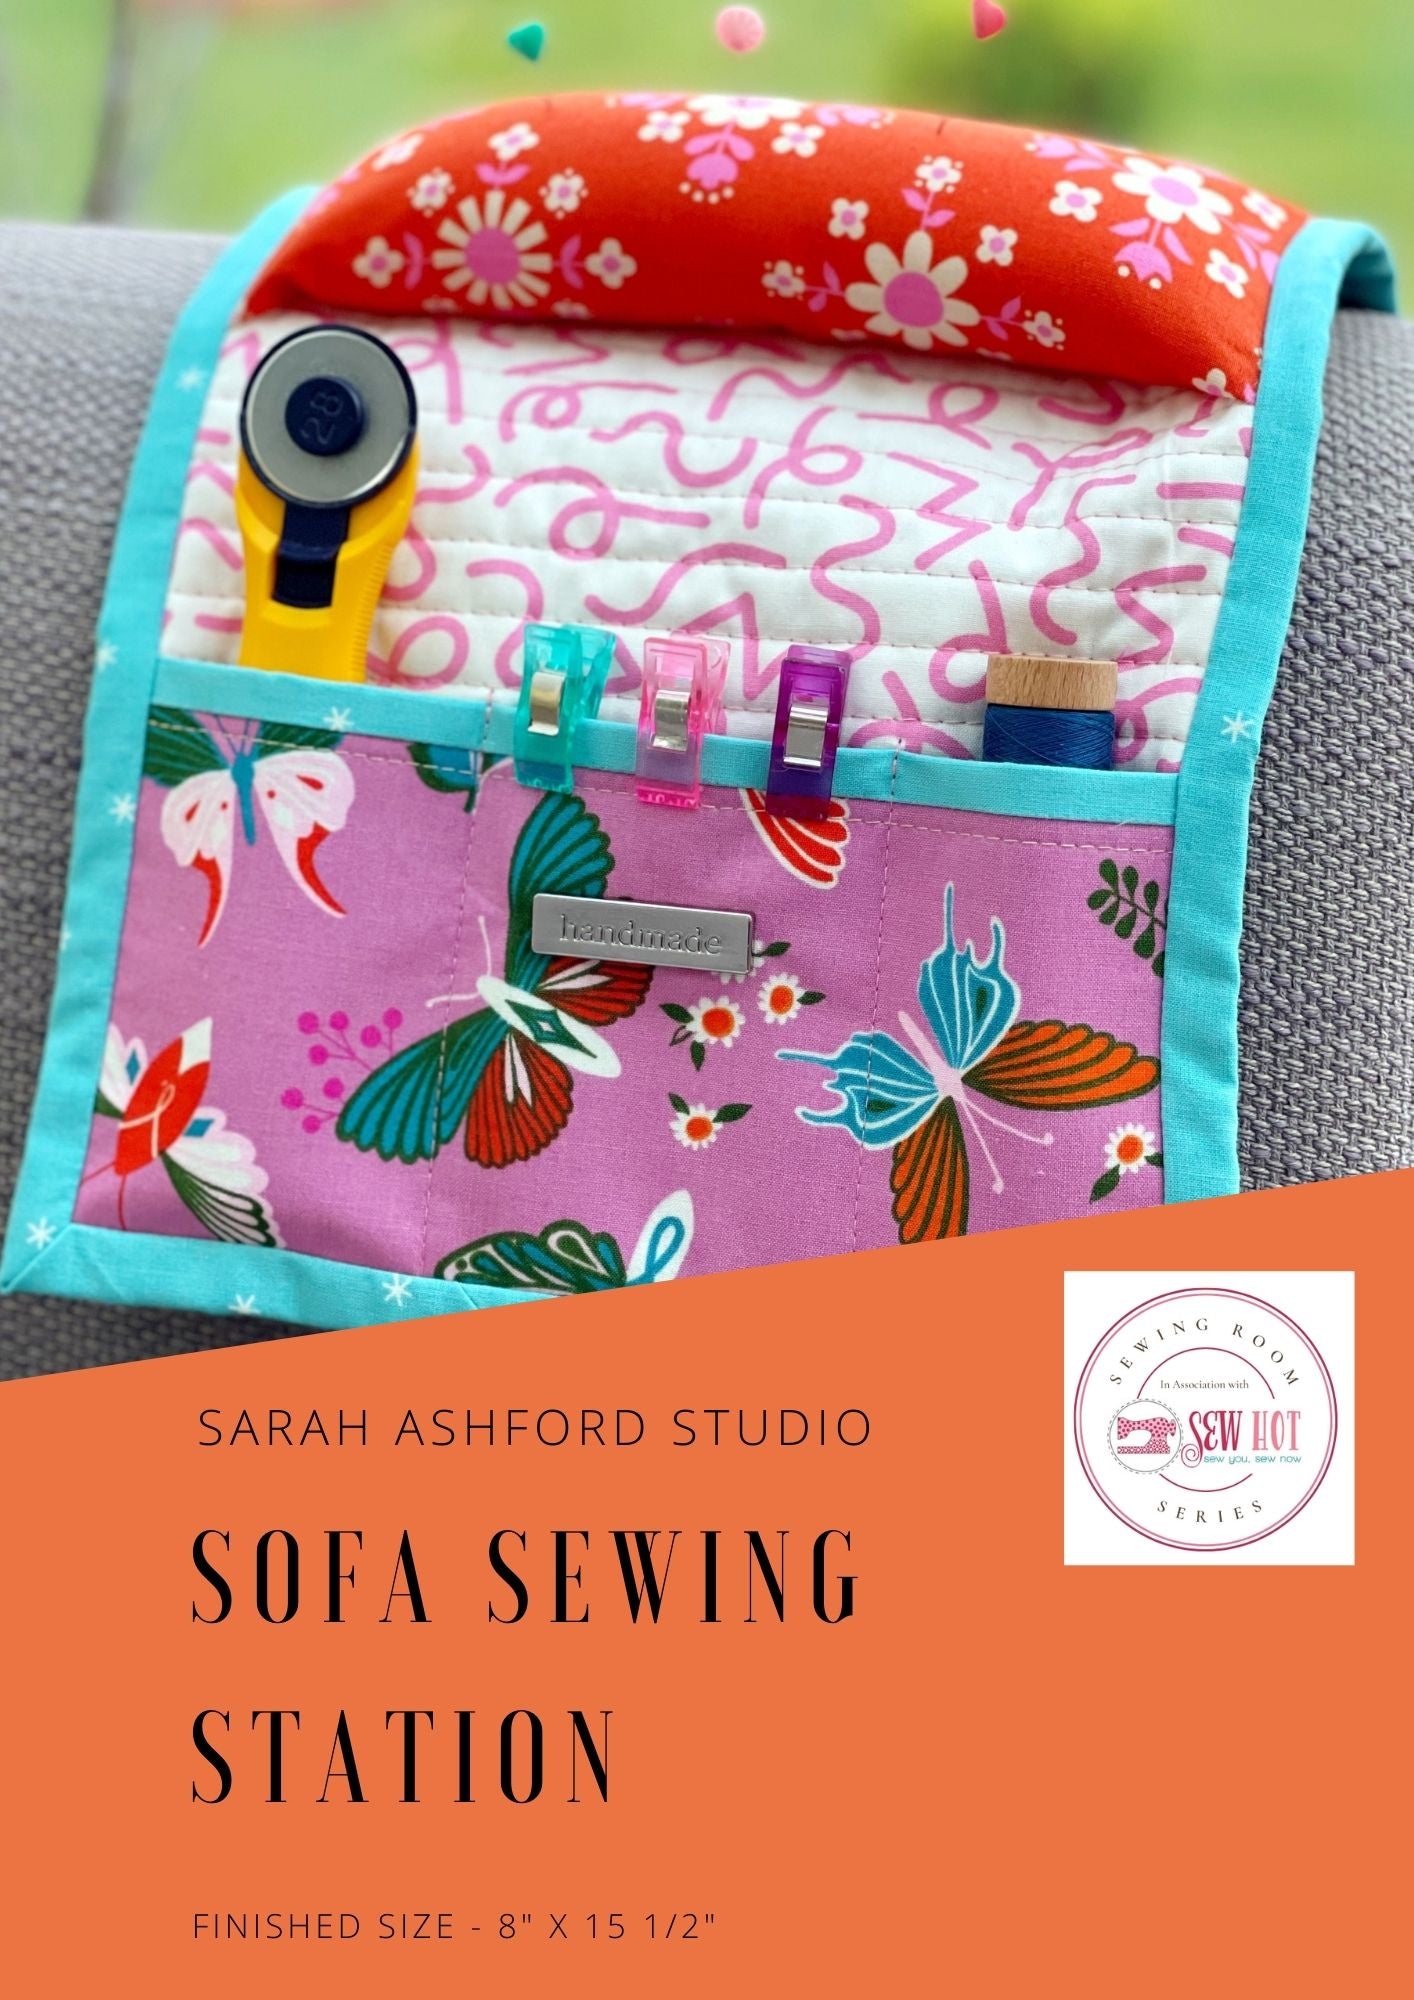 Sewing pattern. This sofa sewing station sits over the arm of a sofa.  There is a pincushion in the middle, and a series of pockets, holding a small rotary cutter, binding clips and thread.  There is a 'handmade' silver tag on the pocket.